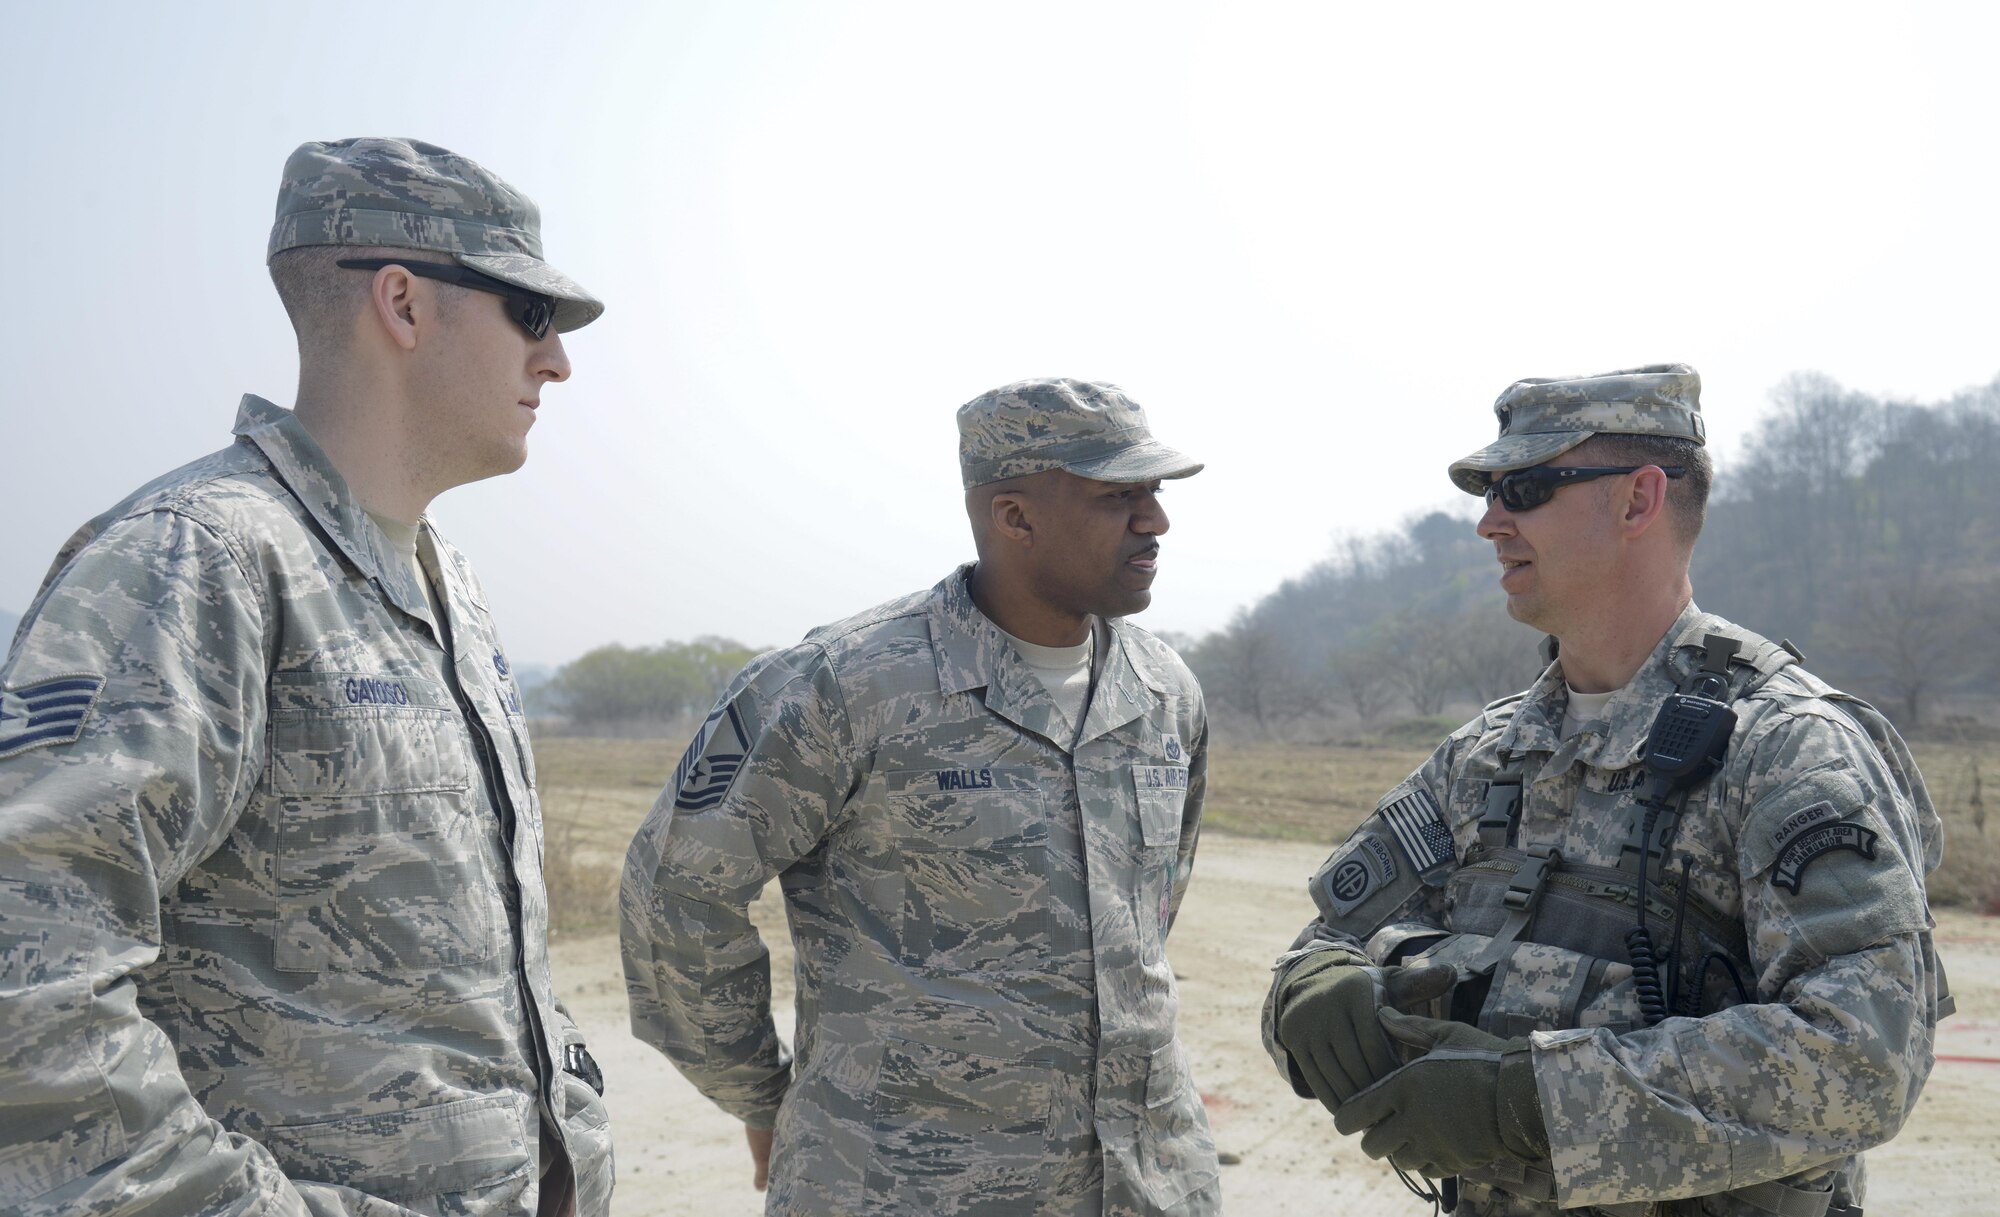 U.S. Air Force Staff Sgt. Eric Gayoso, 51st Civil Engineer Squadron fire prevention crew chief, and Master Sgt. Darnell Walls, 51st CES NCO in charge of training, speak with U.S. Army Lt. Col. Christopher Nyland, Joint Security Area Security Battalion commander, during a joint search and recovery exercise April 8, 2016, at Camp Bonifas, Republic of Korea. 51st CES fire prevention firefighters assisted in the exercise by teaching ROK and U.S. Soldiers how to safely enter a crashed aircraft to rescue individuals. (U.S. Air Force photo by Senior Airman Dillian Bamman/Released)